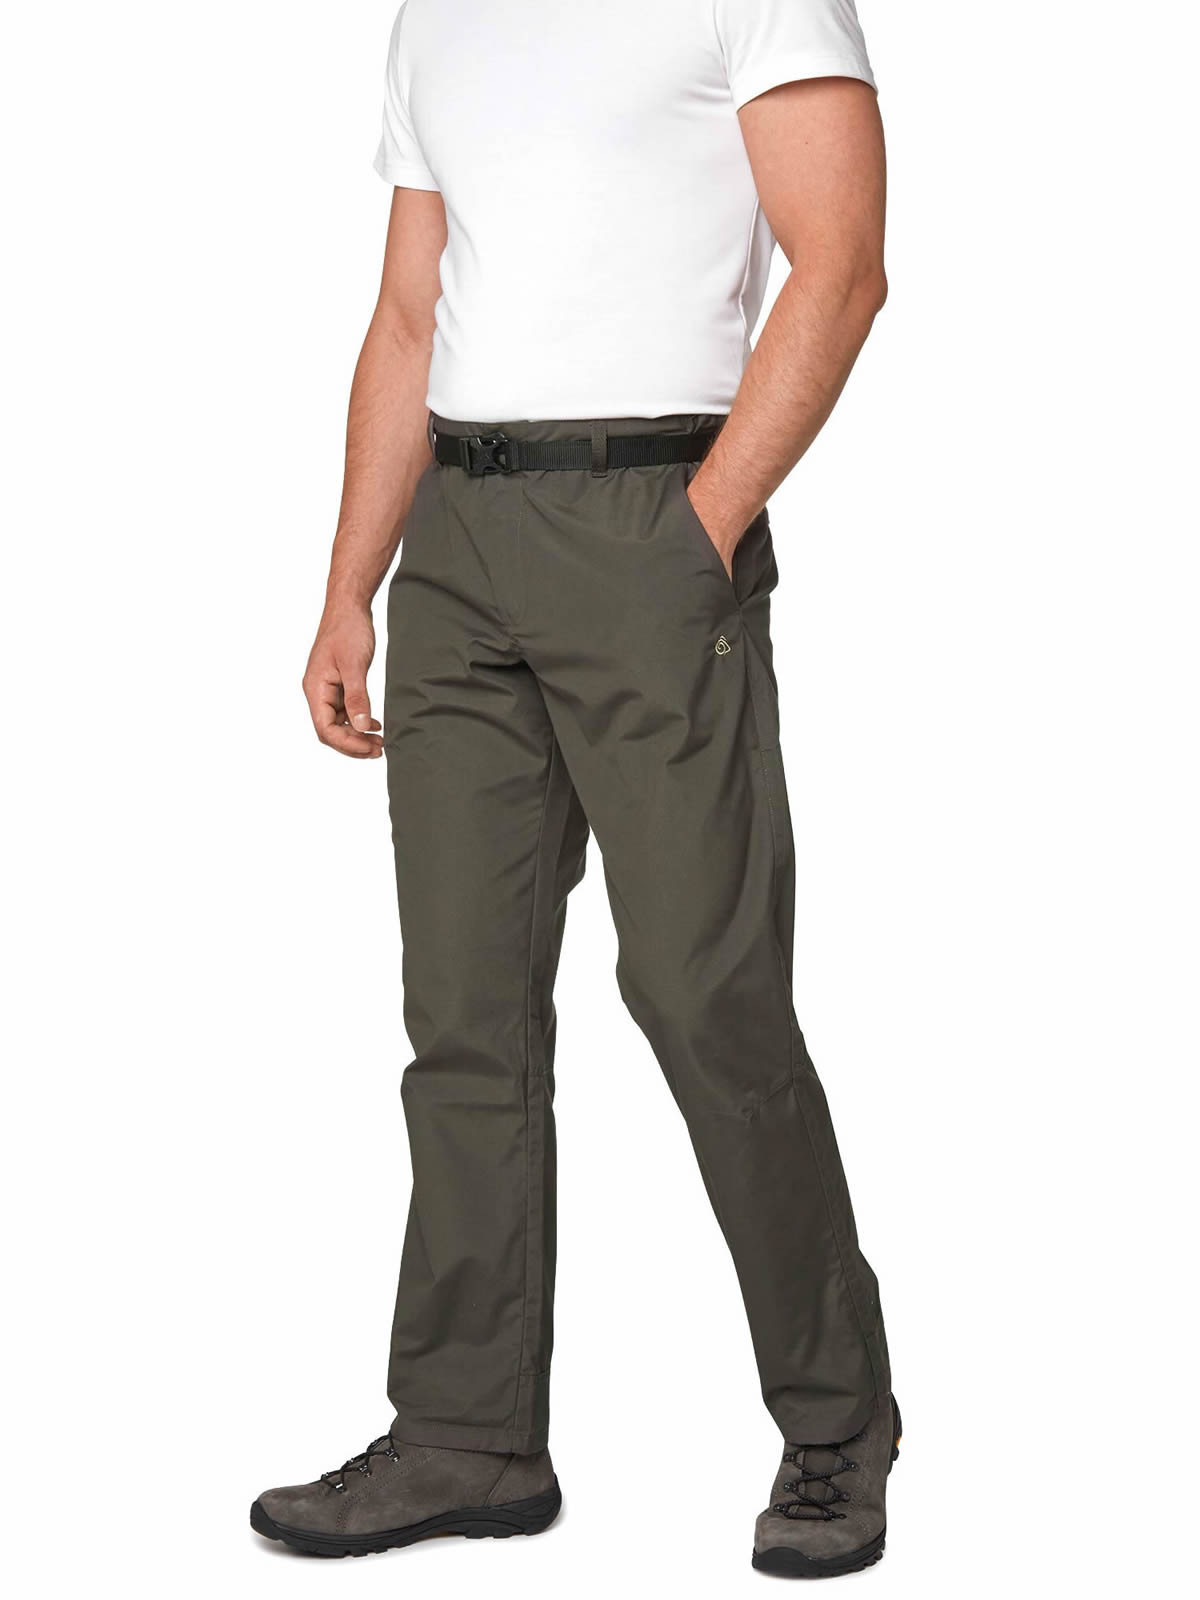 craghoppers kiwi stretch trousers mens